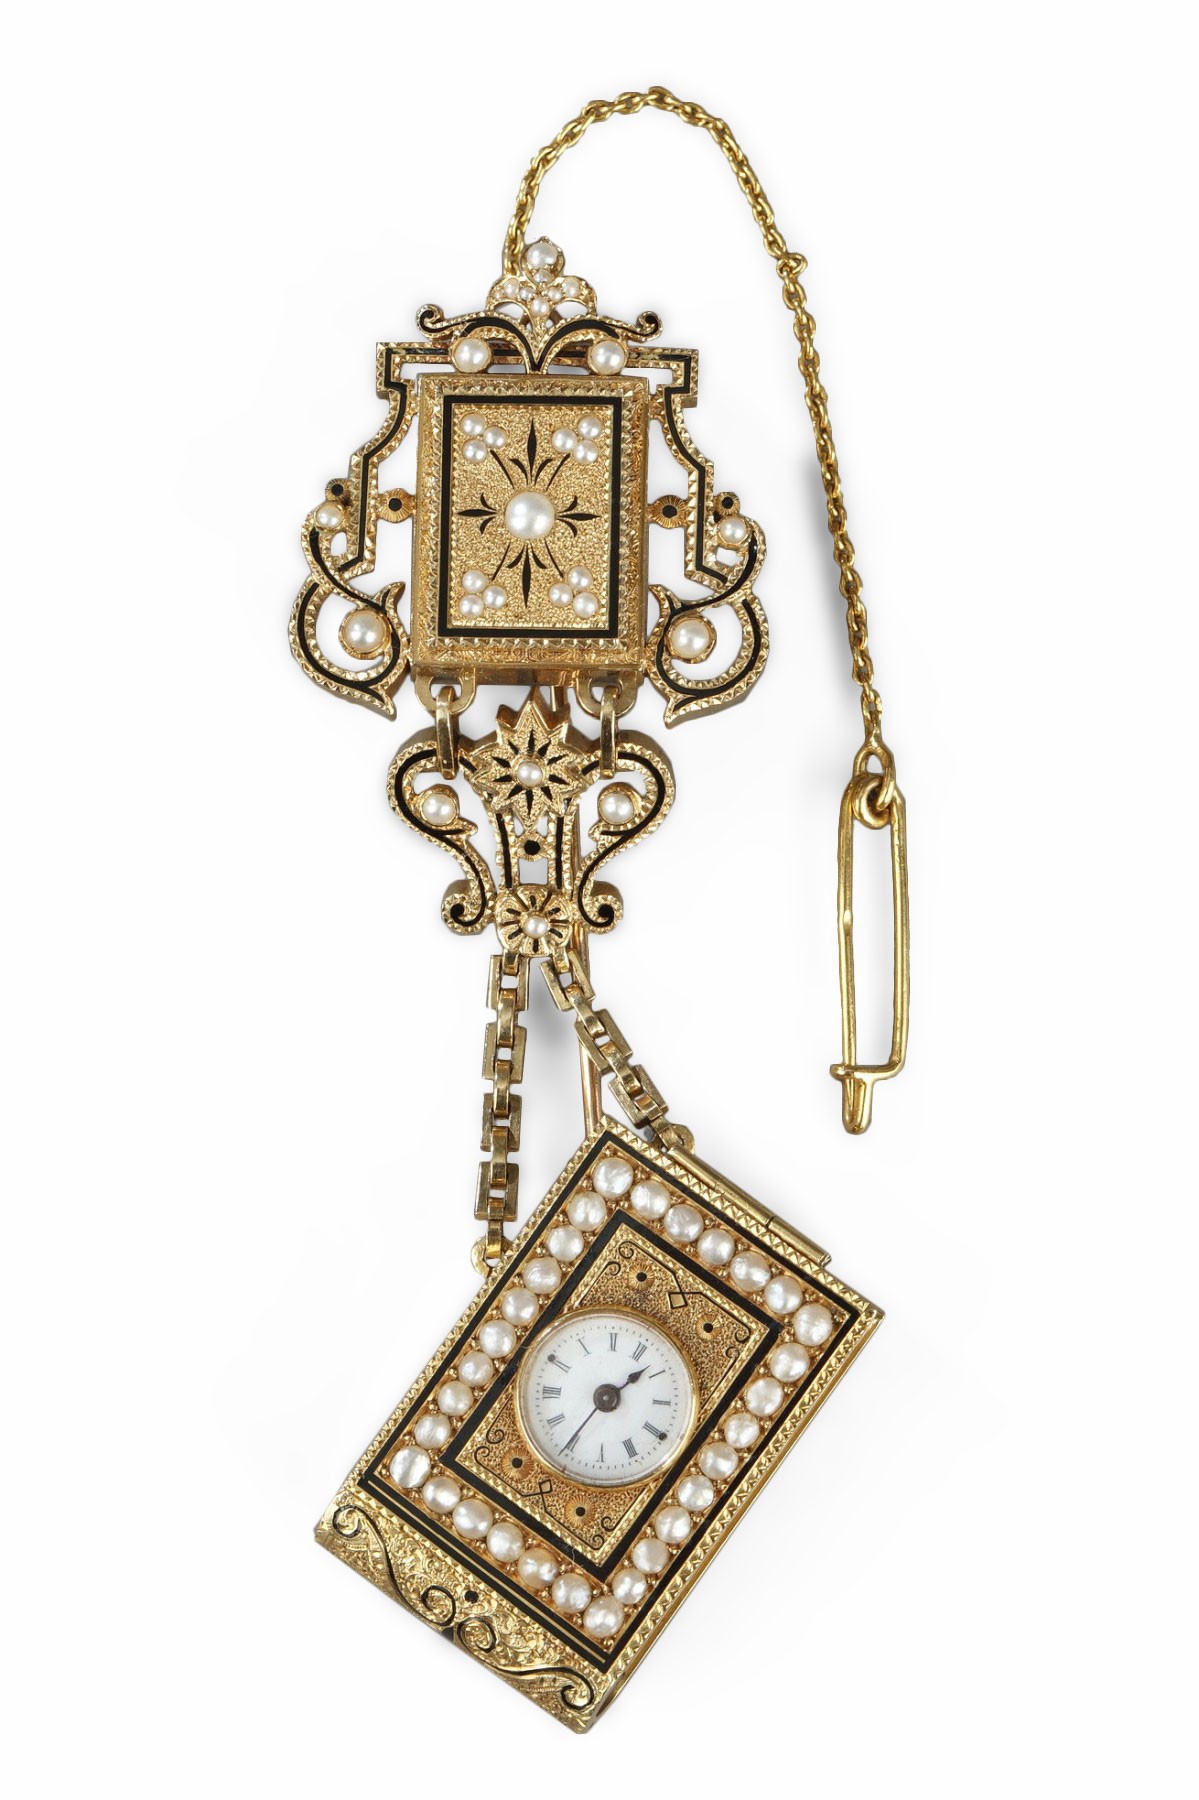 A 19th Century gold and enamel watch with associated chatelaine - Ref.98495